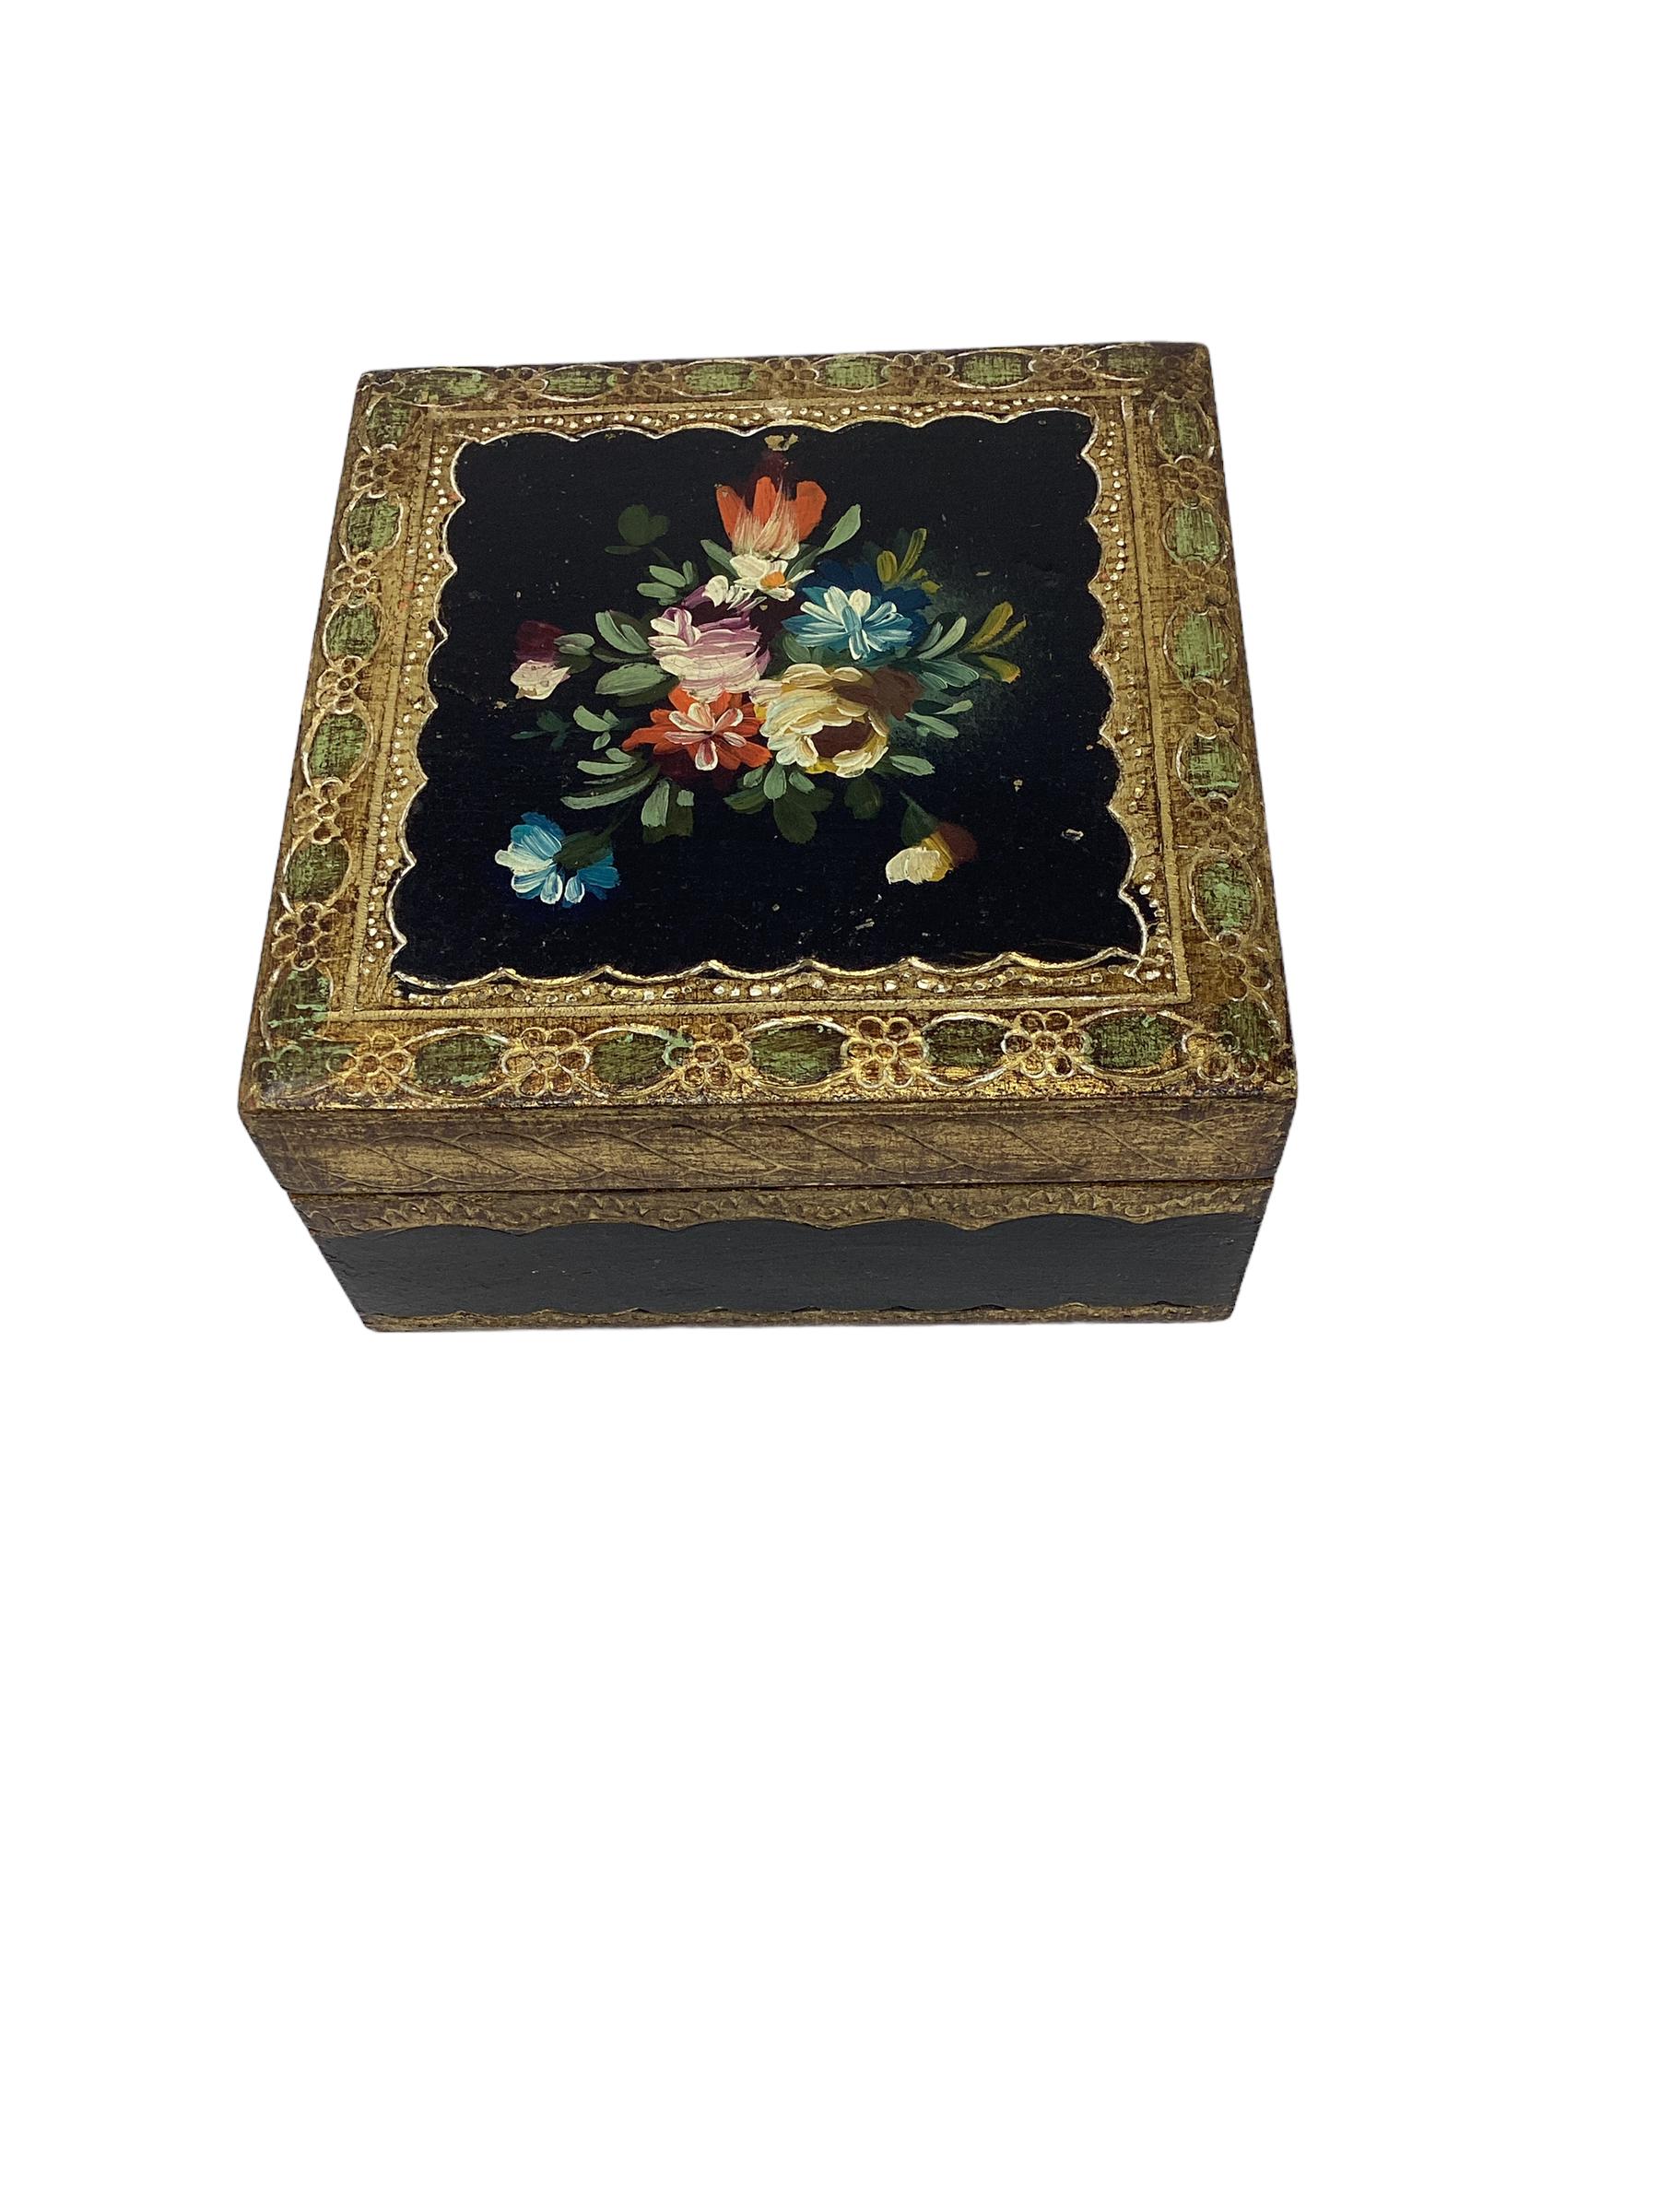 Wood Vintage Painted and Gilt Florentine Box For Sale